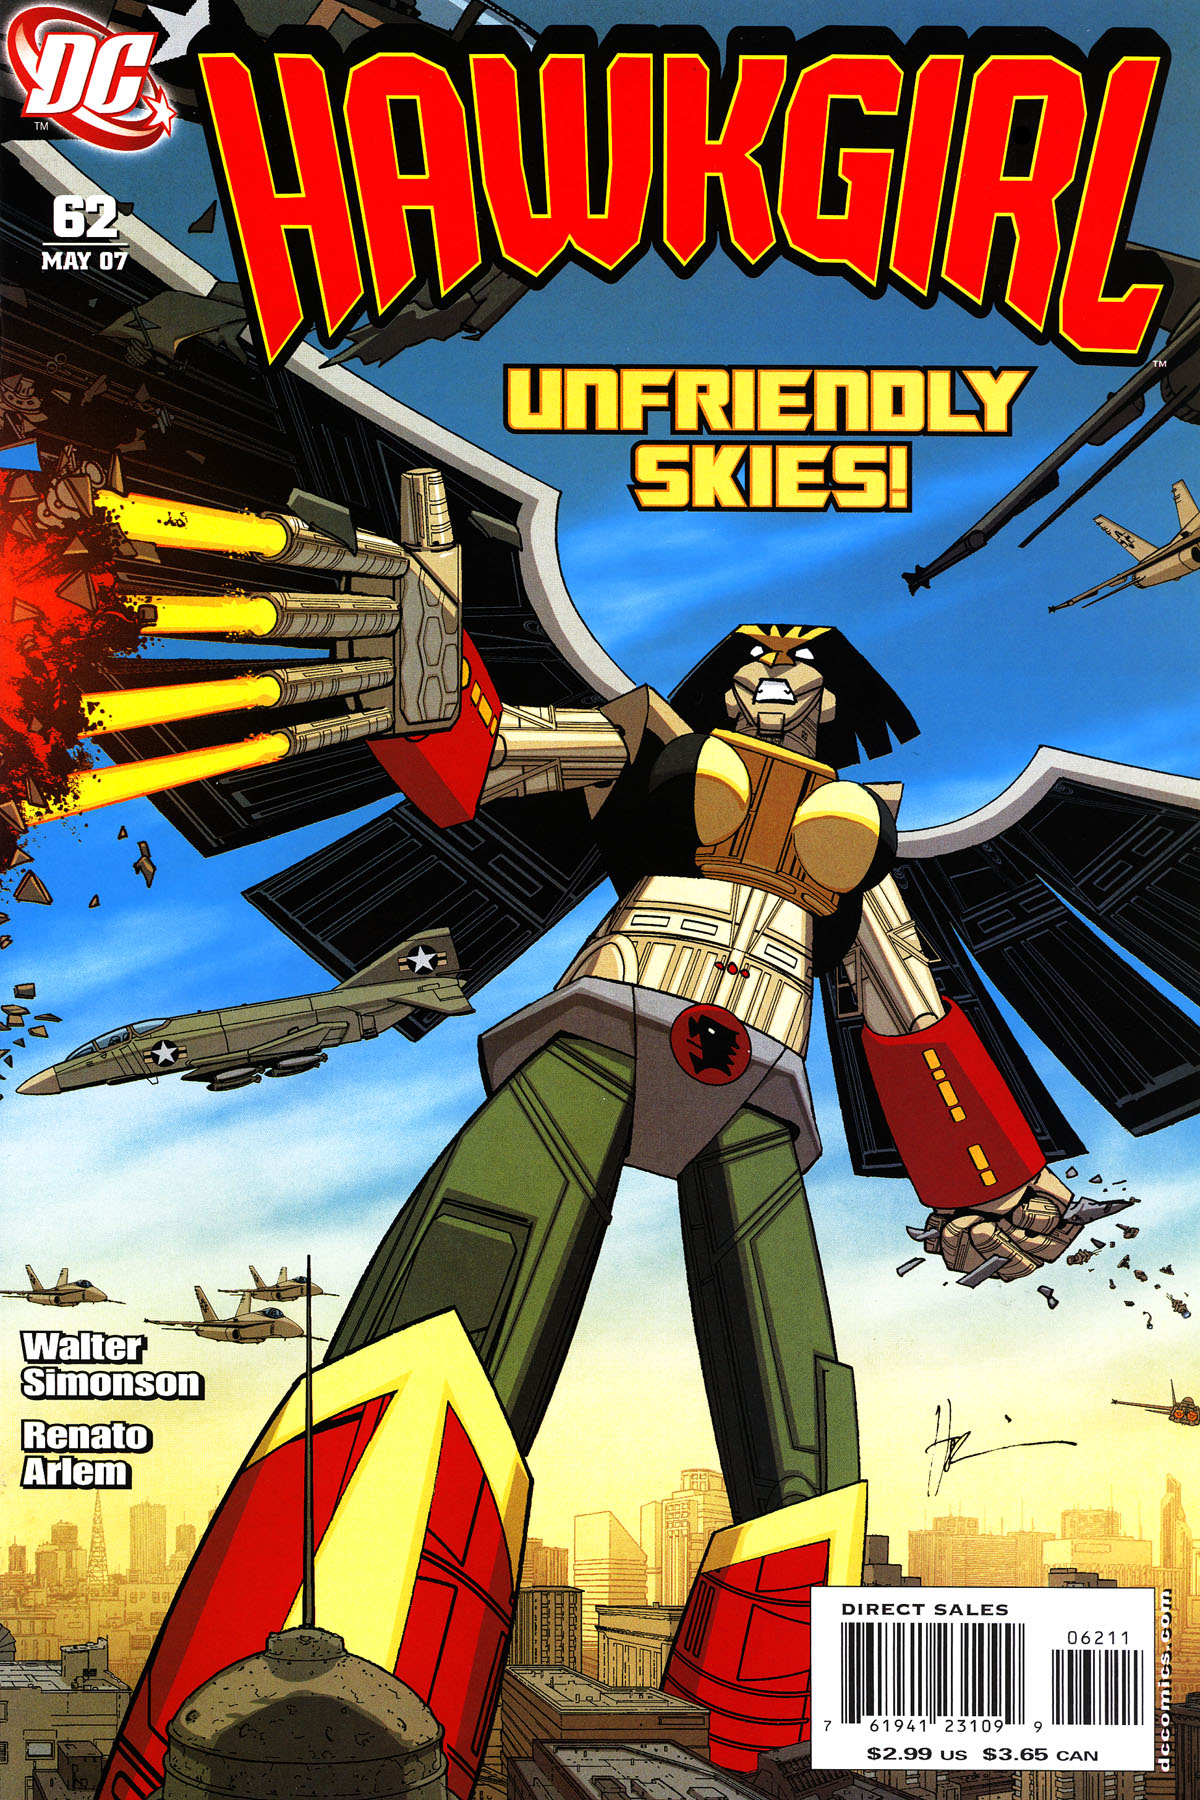 Read online Hawkgirl comic -  Issue #62 - 1